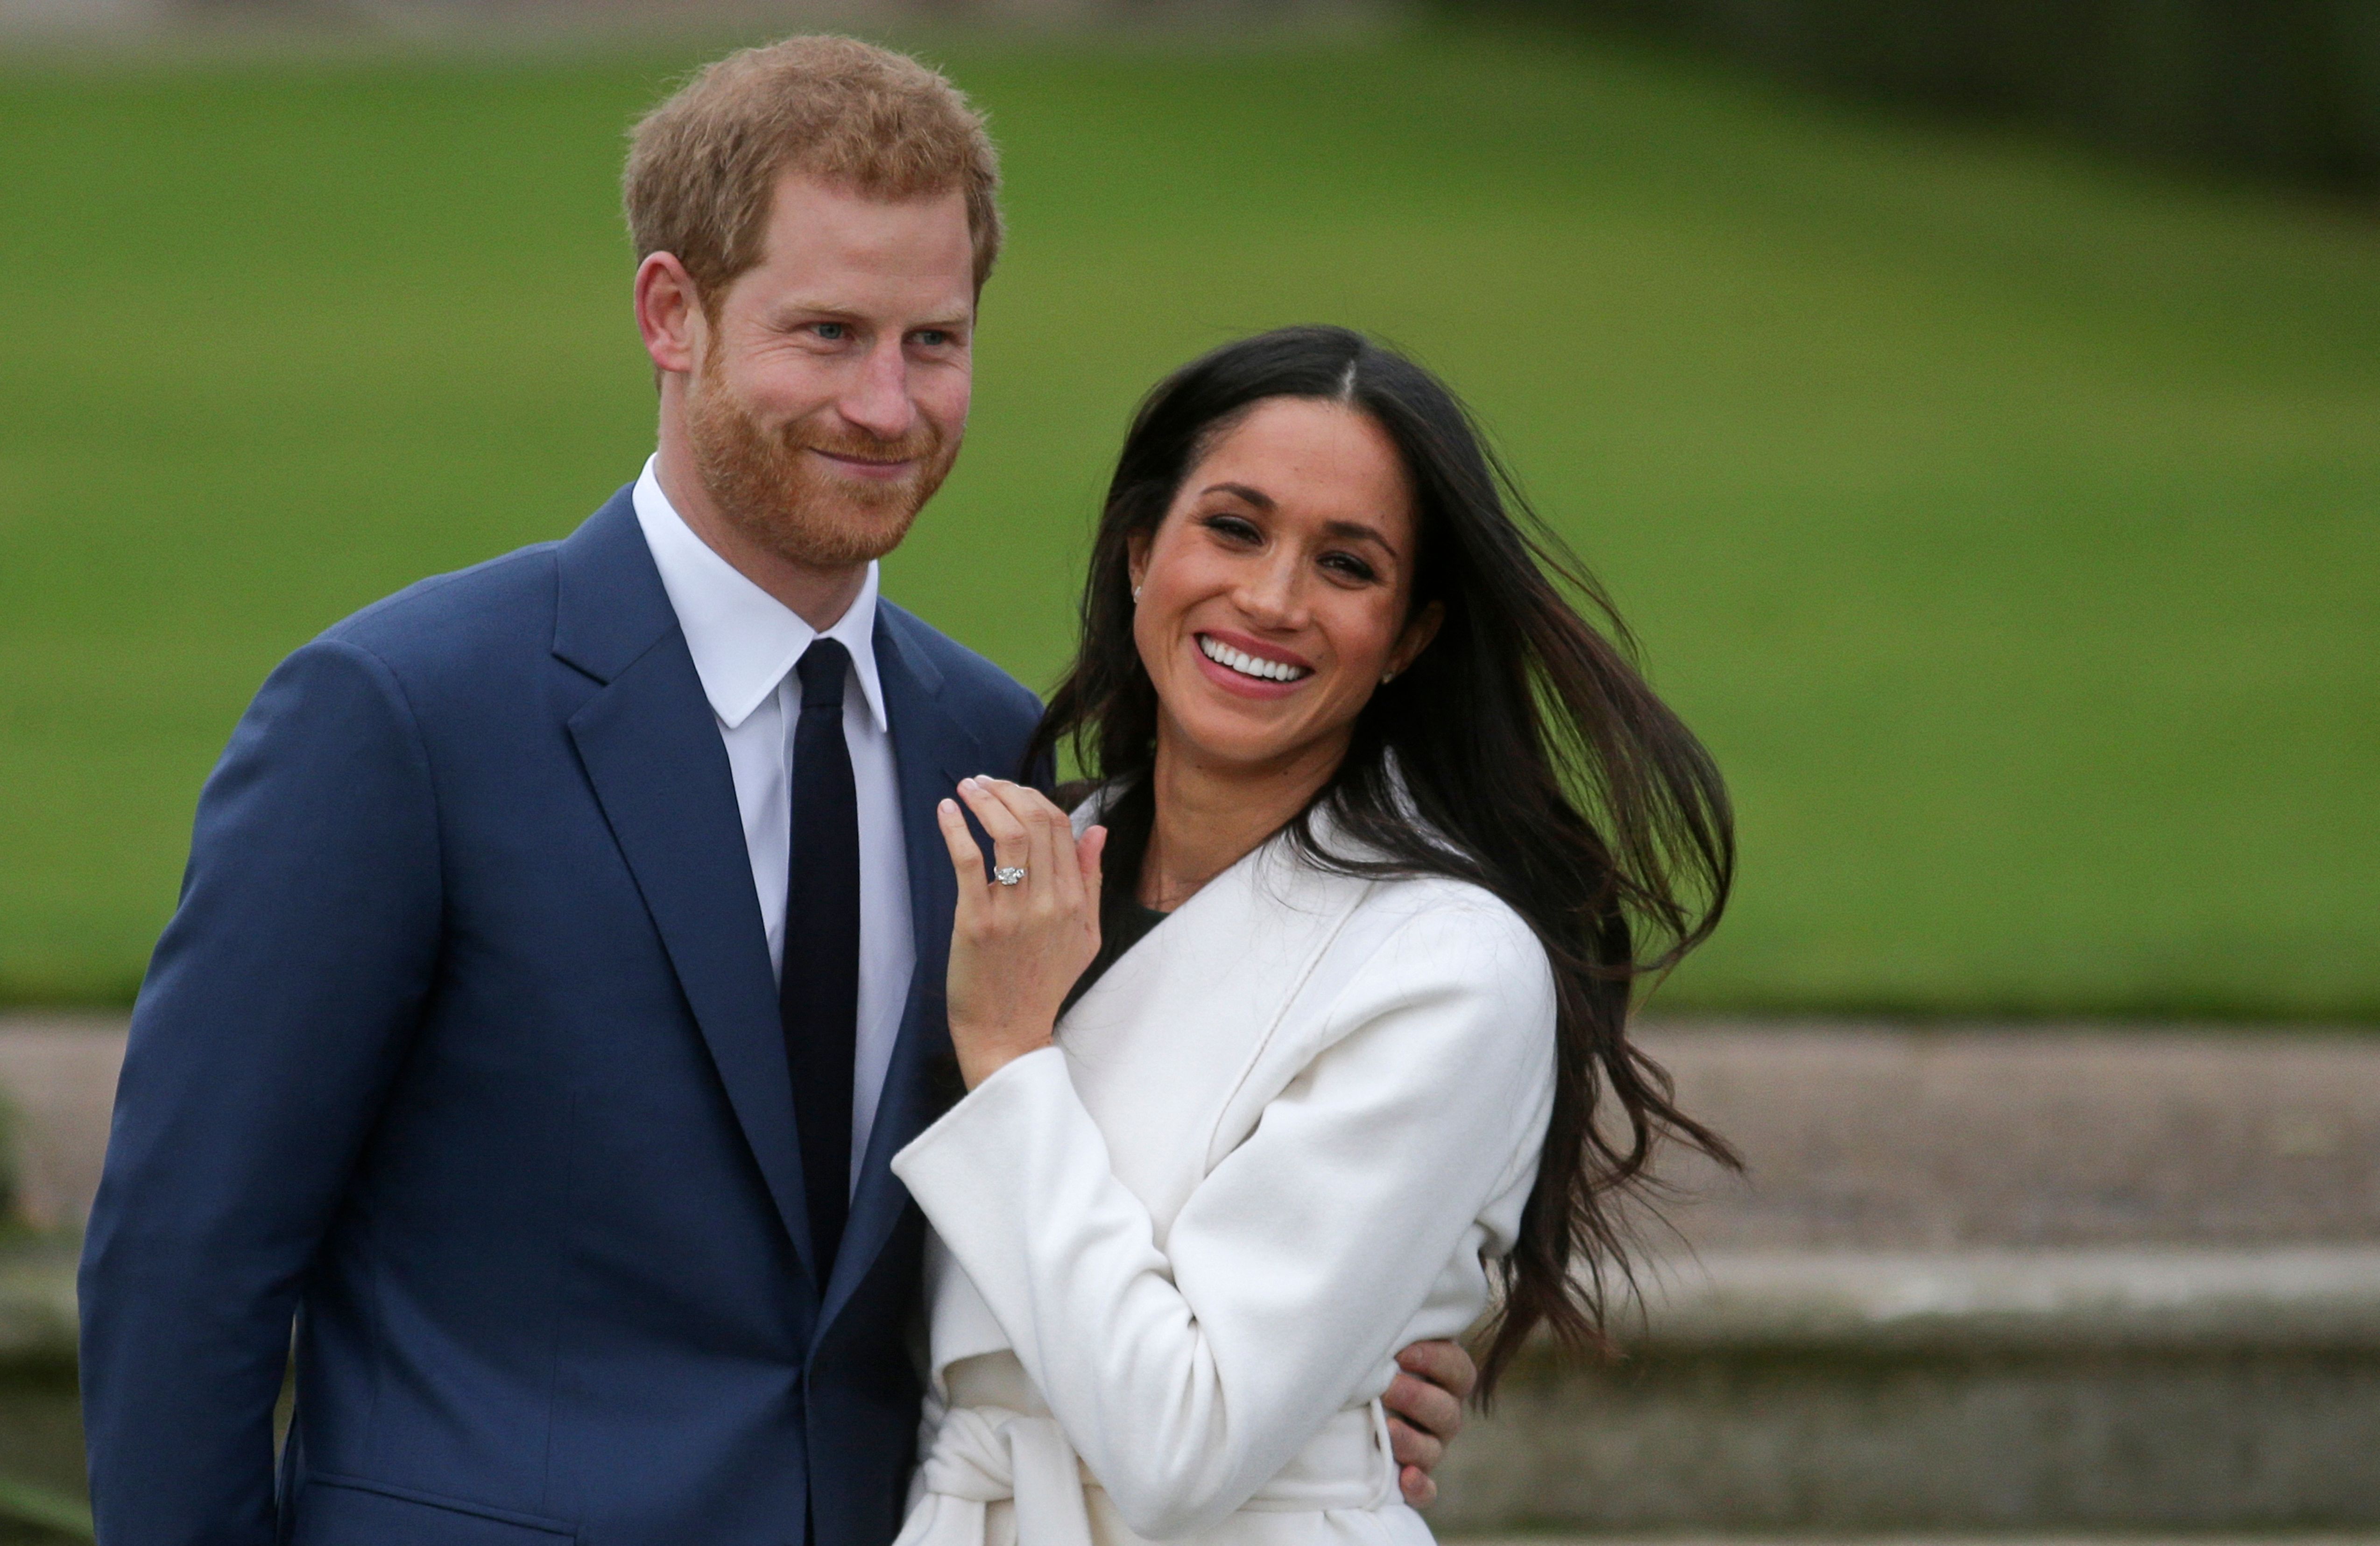 Britain's Prince Harry stands with his fiancée US actress Meghan Markle as she shows off her engagement ring while they pose for a photograph in the Sunken Garden at Kensington Palace in west London on November 27, 2017, following the announcement of their engagement. | Source: Getty Images